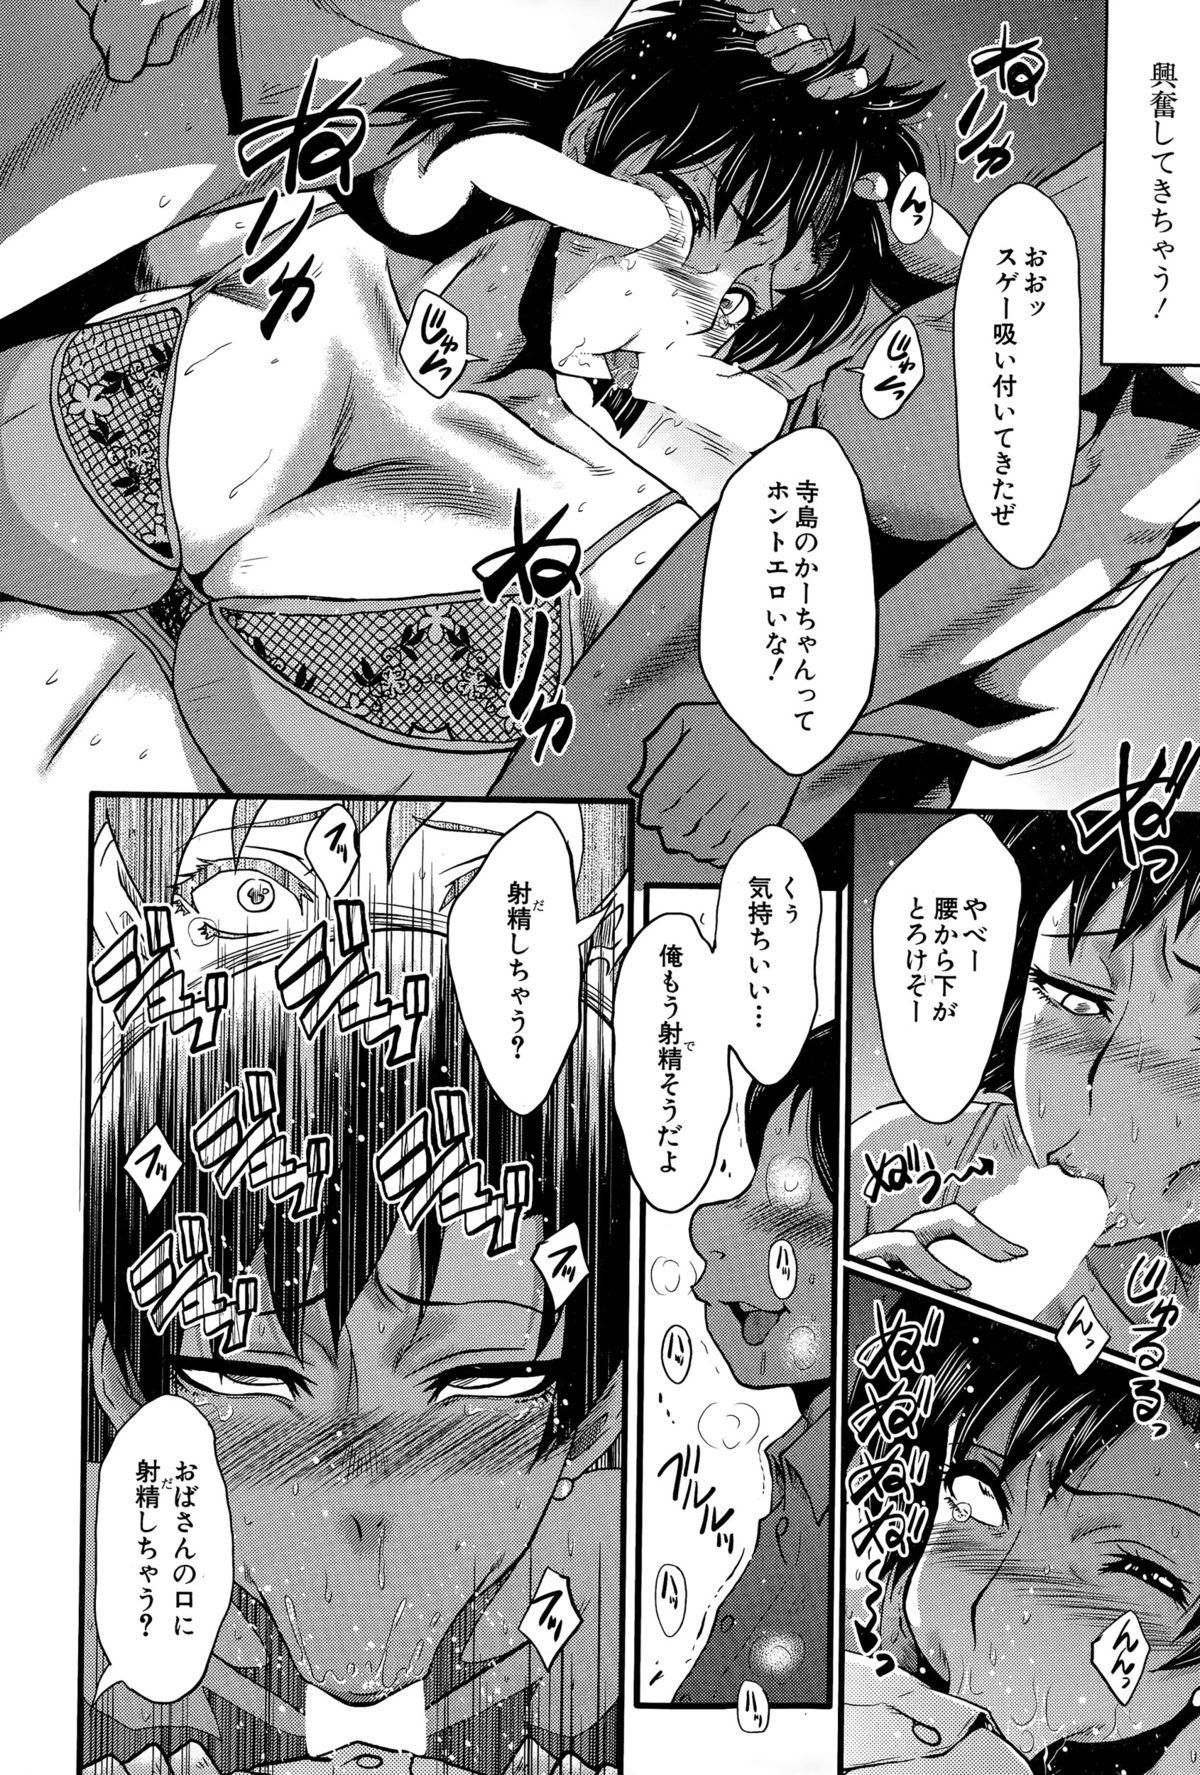 BUSTER COMIC 2015-11 147